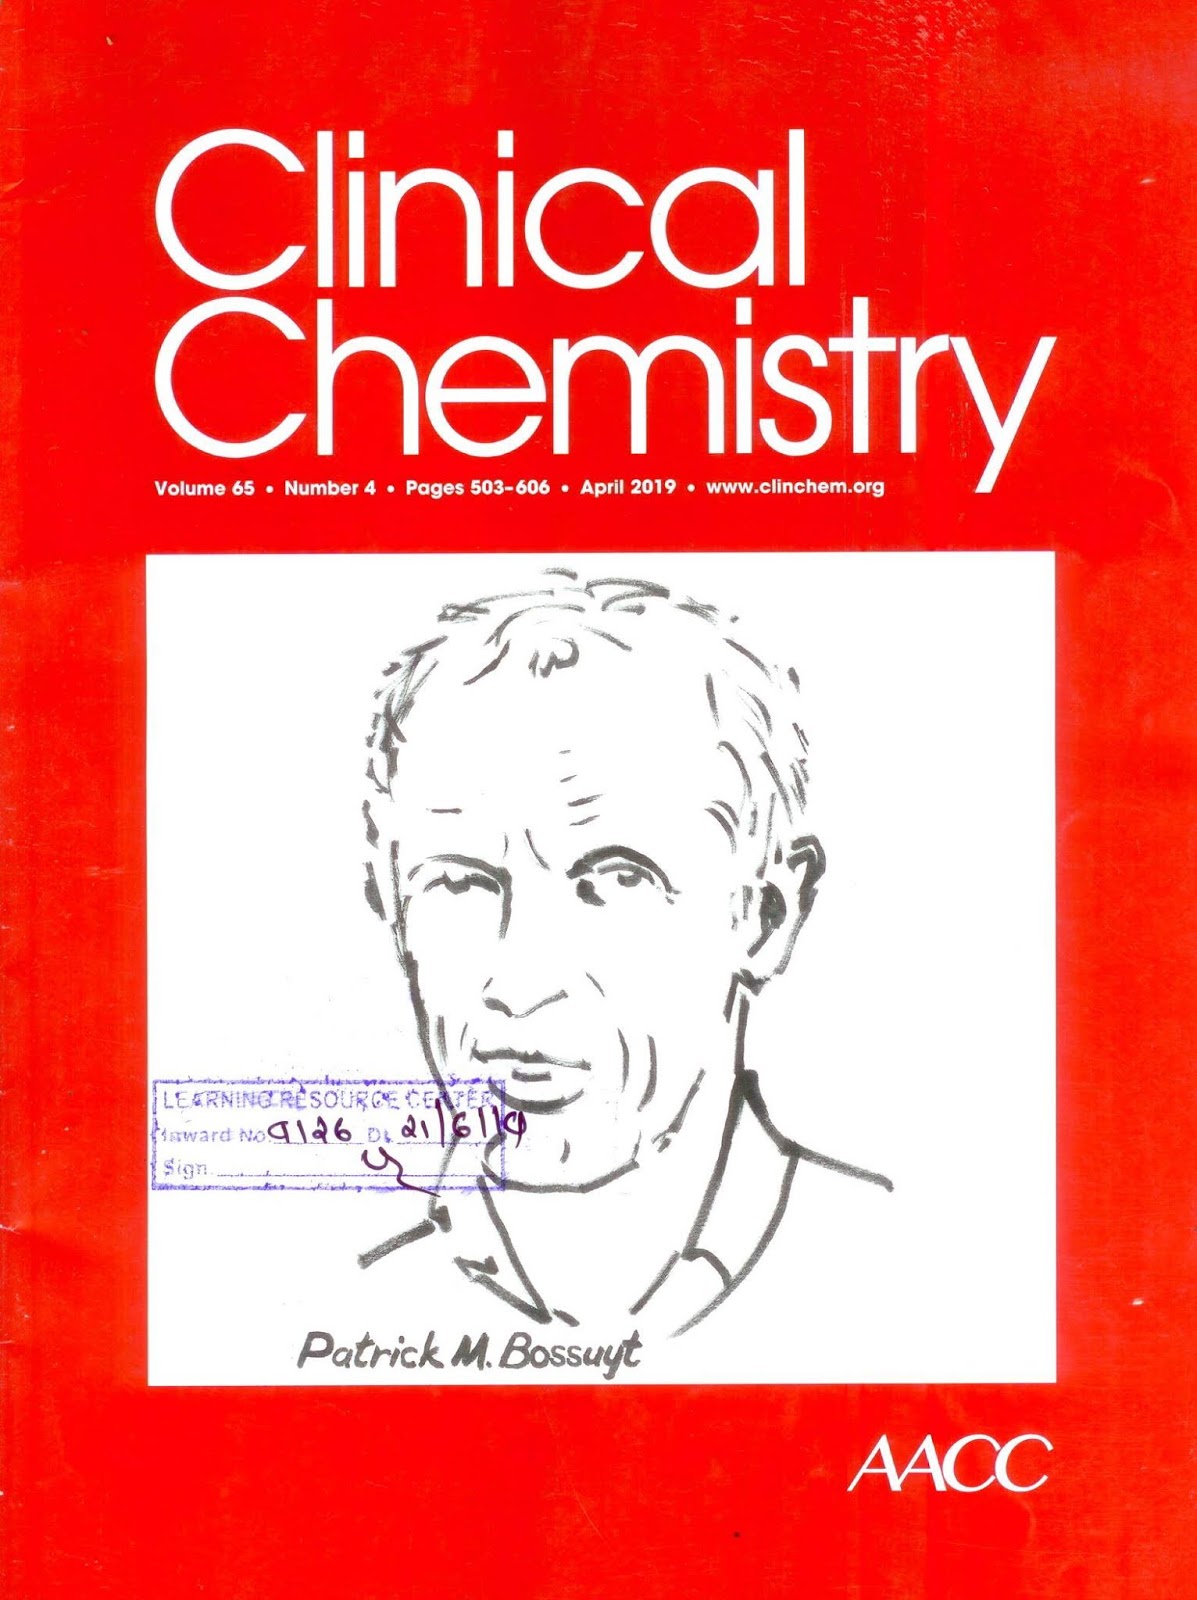 http://clinchem.aaccjnls.org/content/65/4